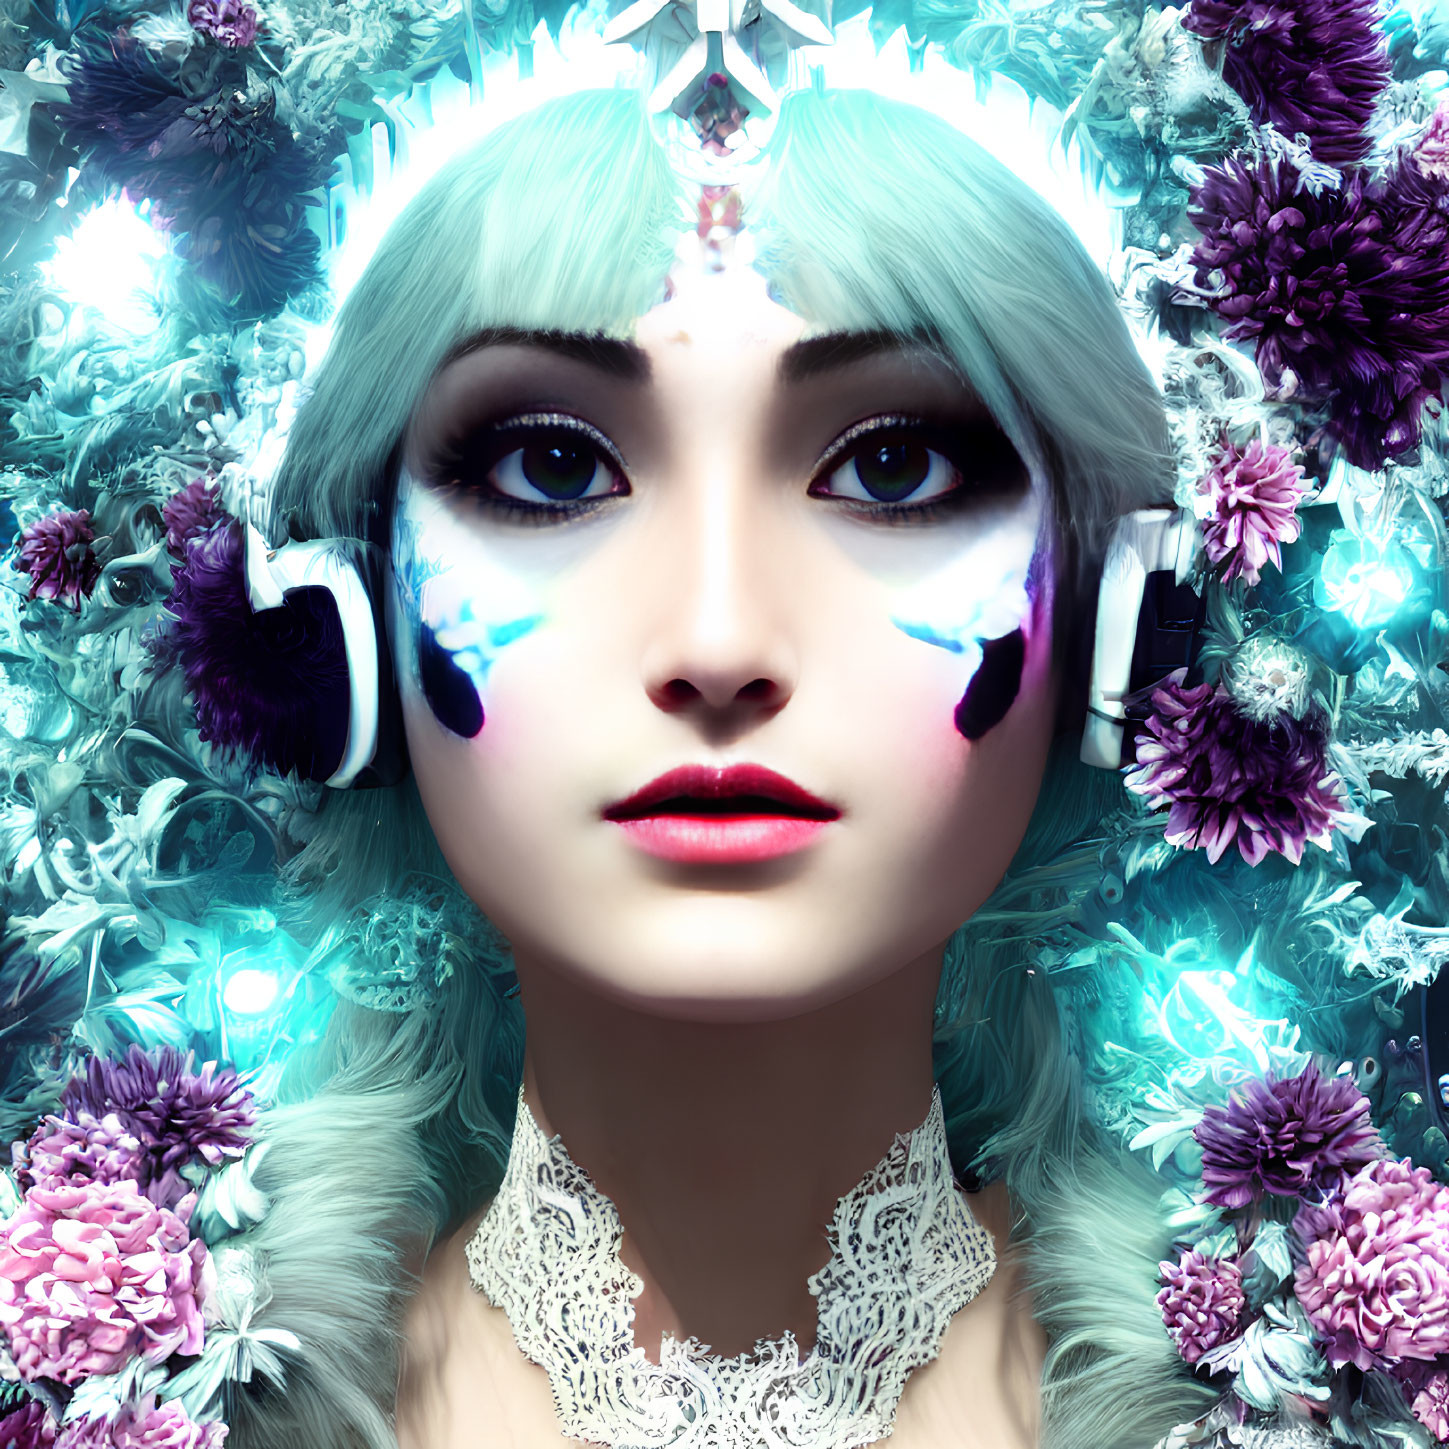 Surreal portrait of pale woman with white hair and headphones amid blue and purple flowers.